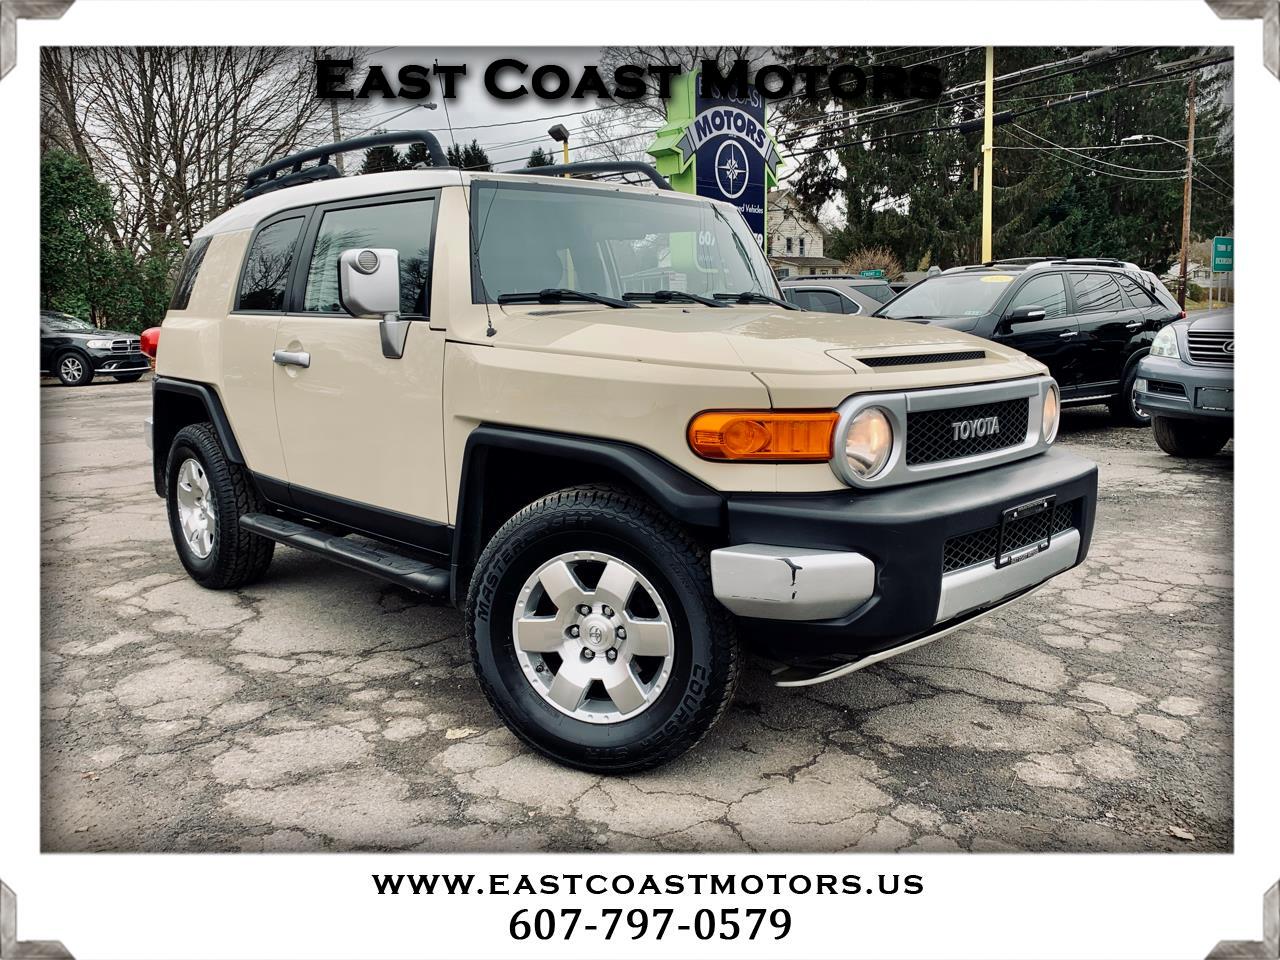 Used 2008 Toyota Fj Cruiser 4wd At For Sale In Binghamton Ny 13901